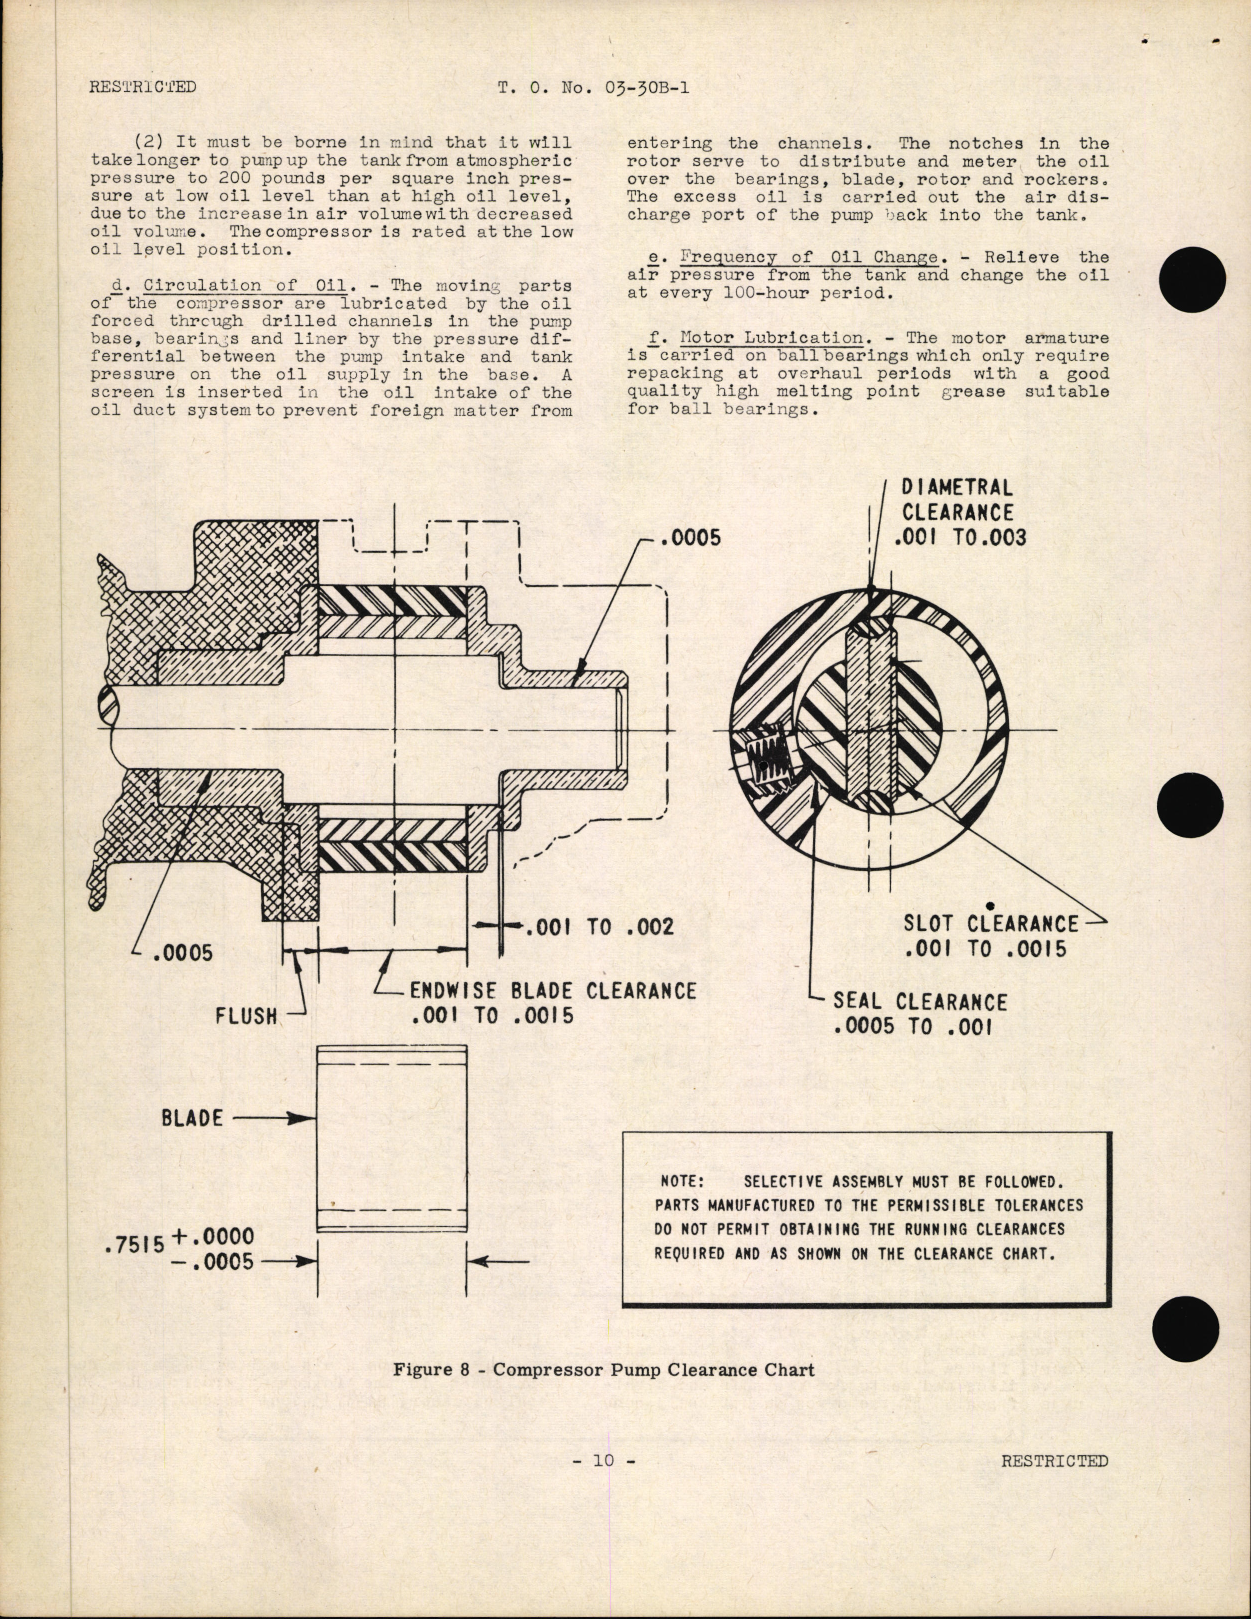 Sample page 12 from AirCorps Library document: Handbook of Instructions with Parts Catalog for Air Compressor Unit Romec Type E-14